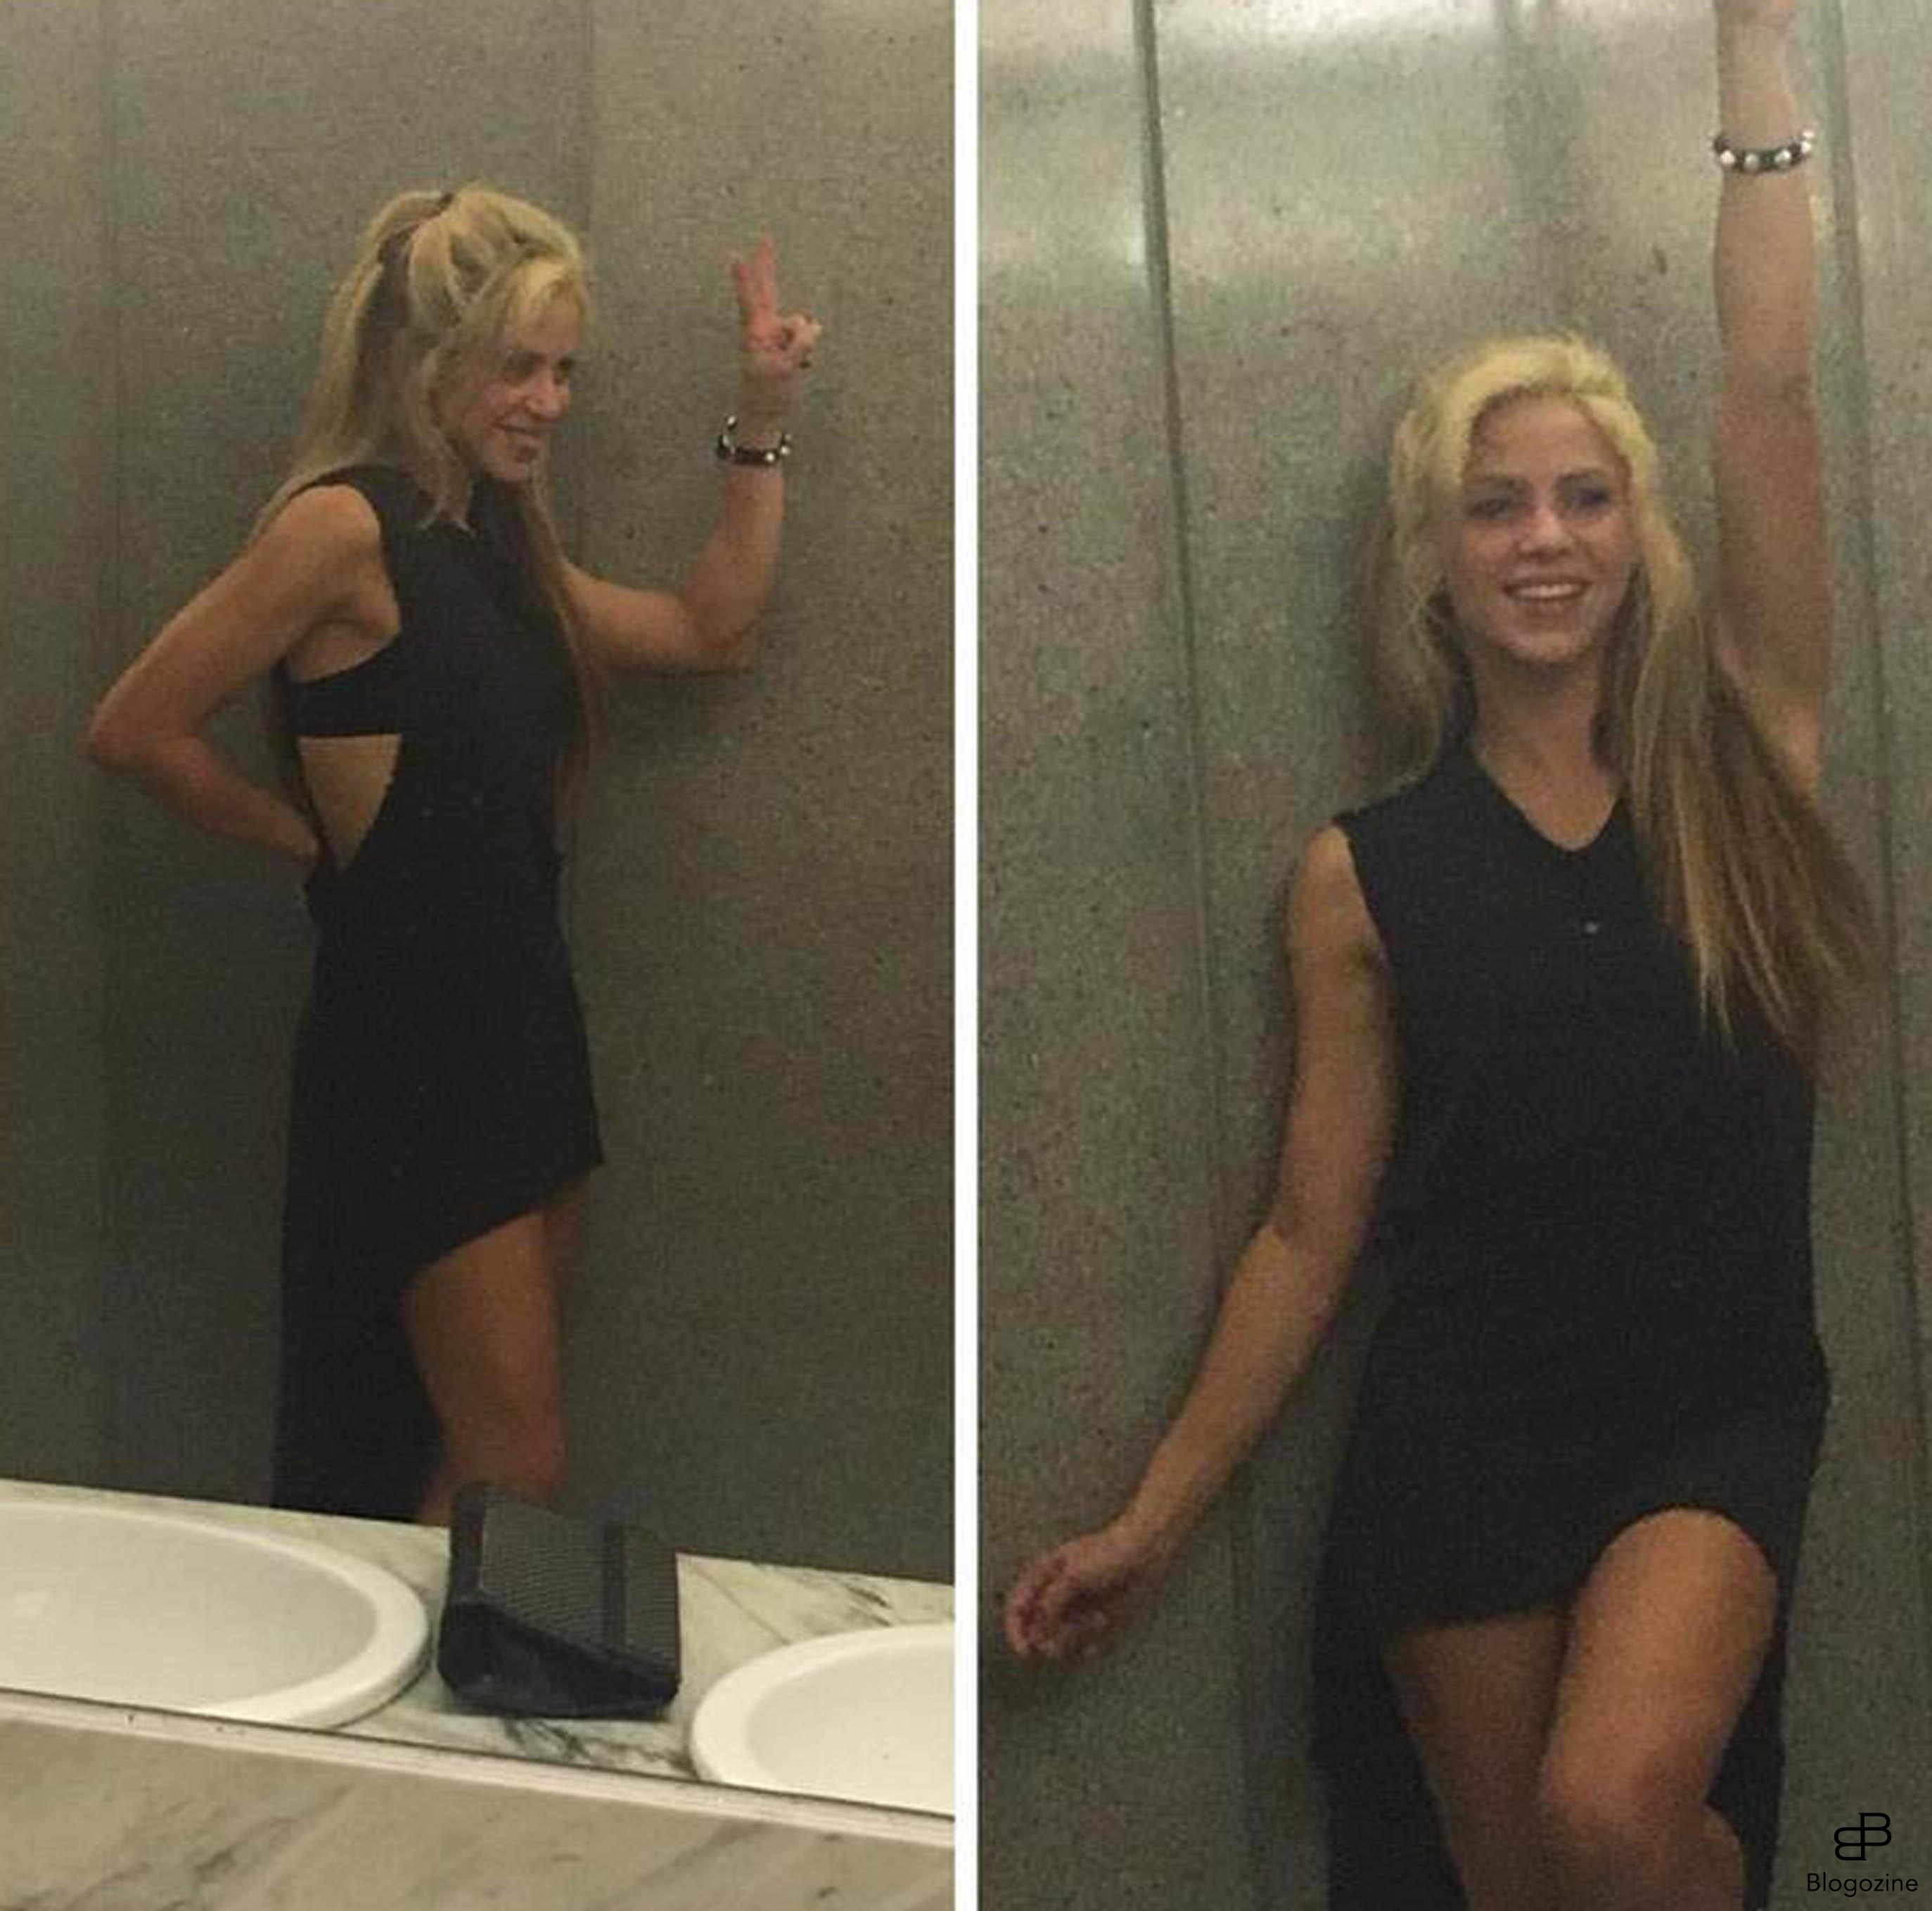 6334018 10-10-2016 Celebrity Selfies Pictured: Shakira PLANET PHOTOS www.planetphotos.co.uk info@planetphotos.co.uk +44 (0)20 8883 1438 DISTR. STELLA PICTURES